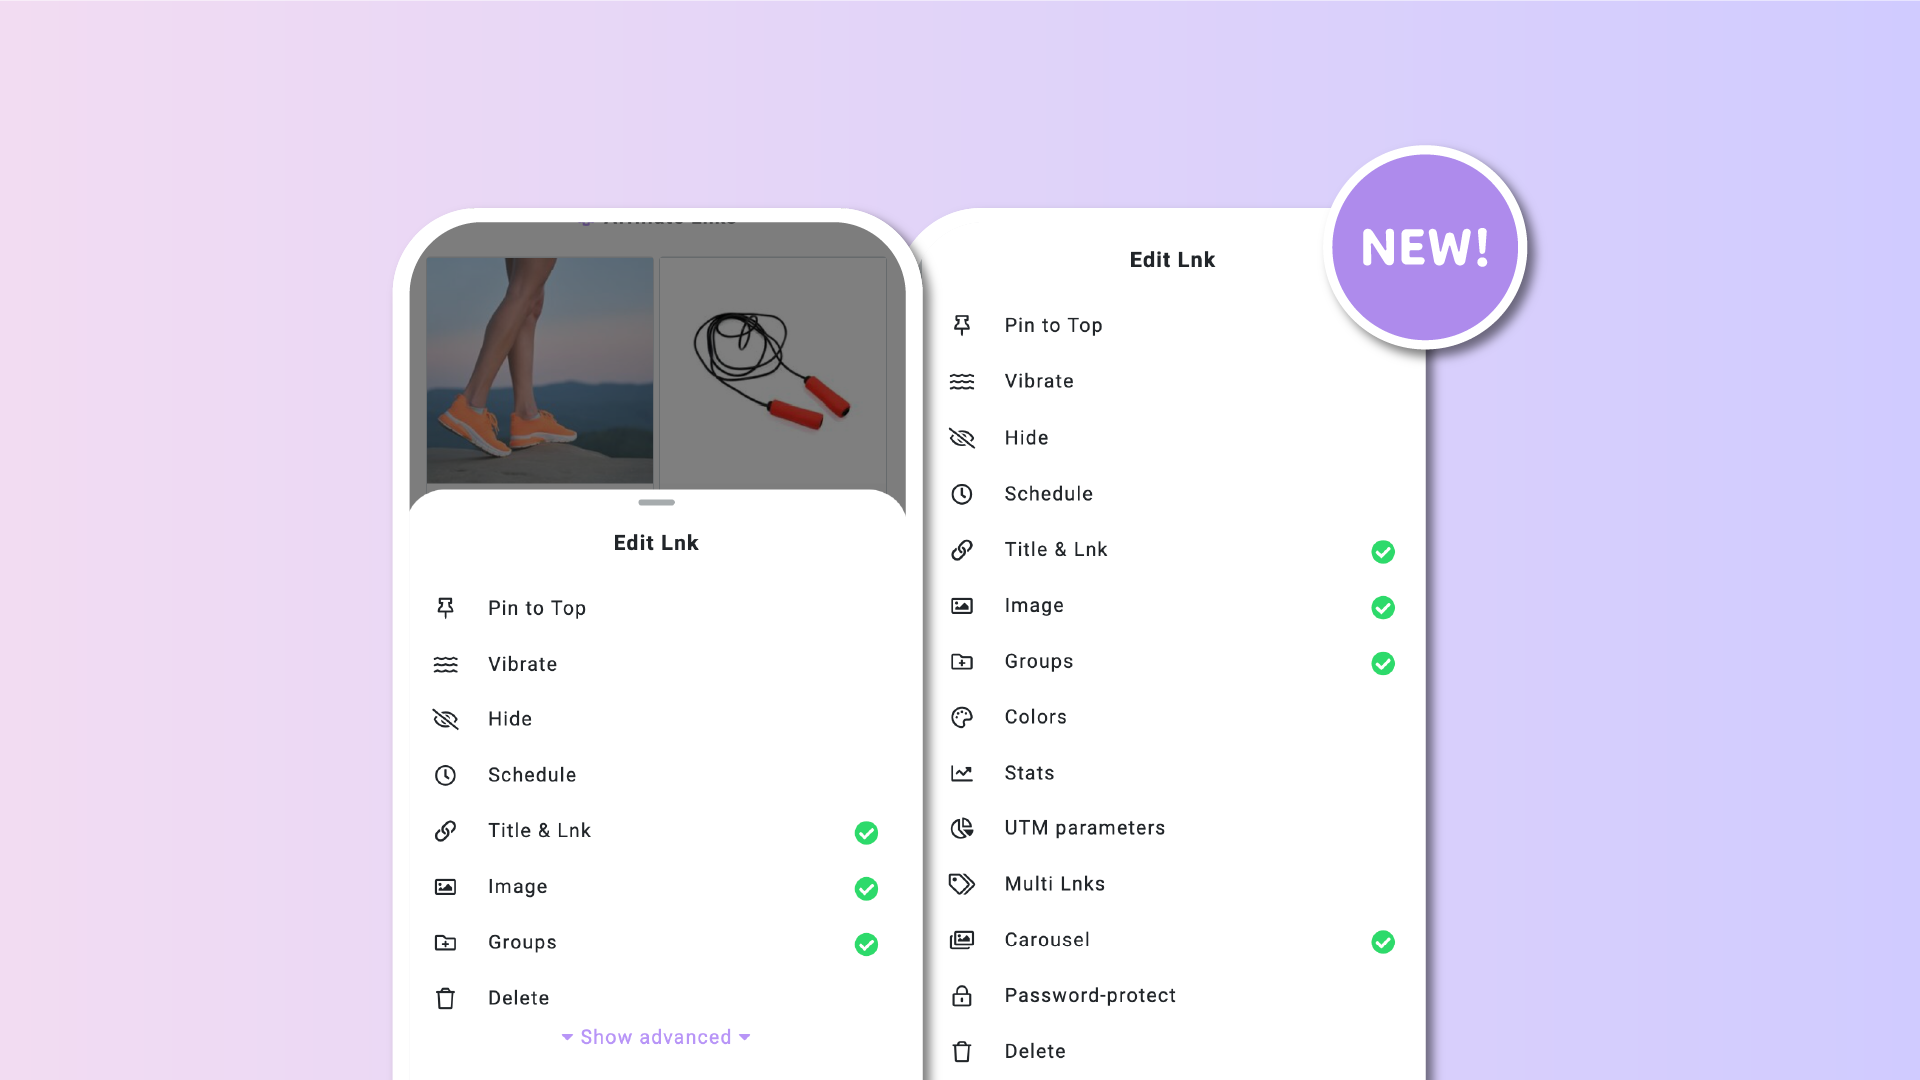 The Edit Lnk menu has been simplified for easier access to main functions